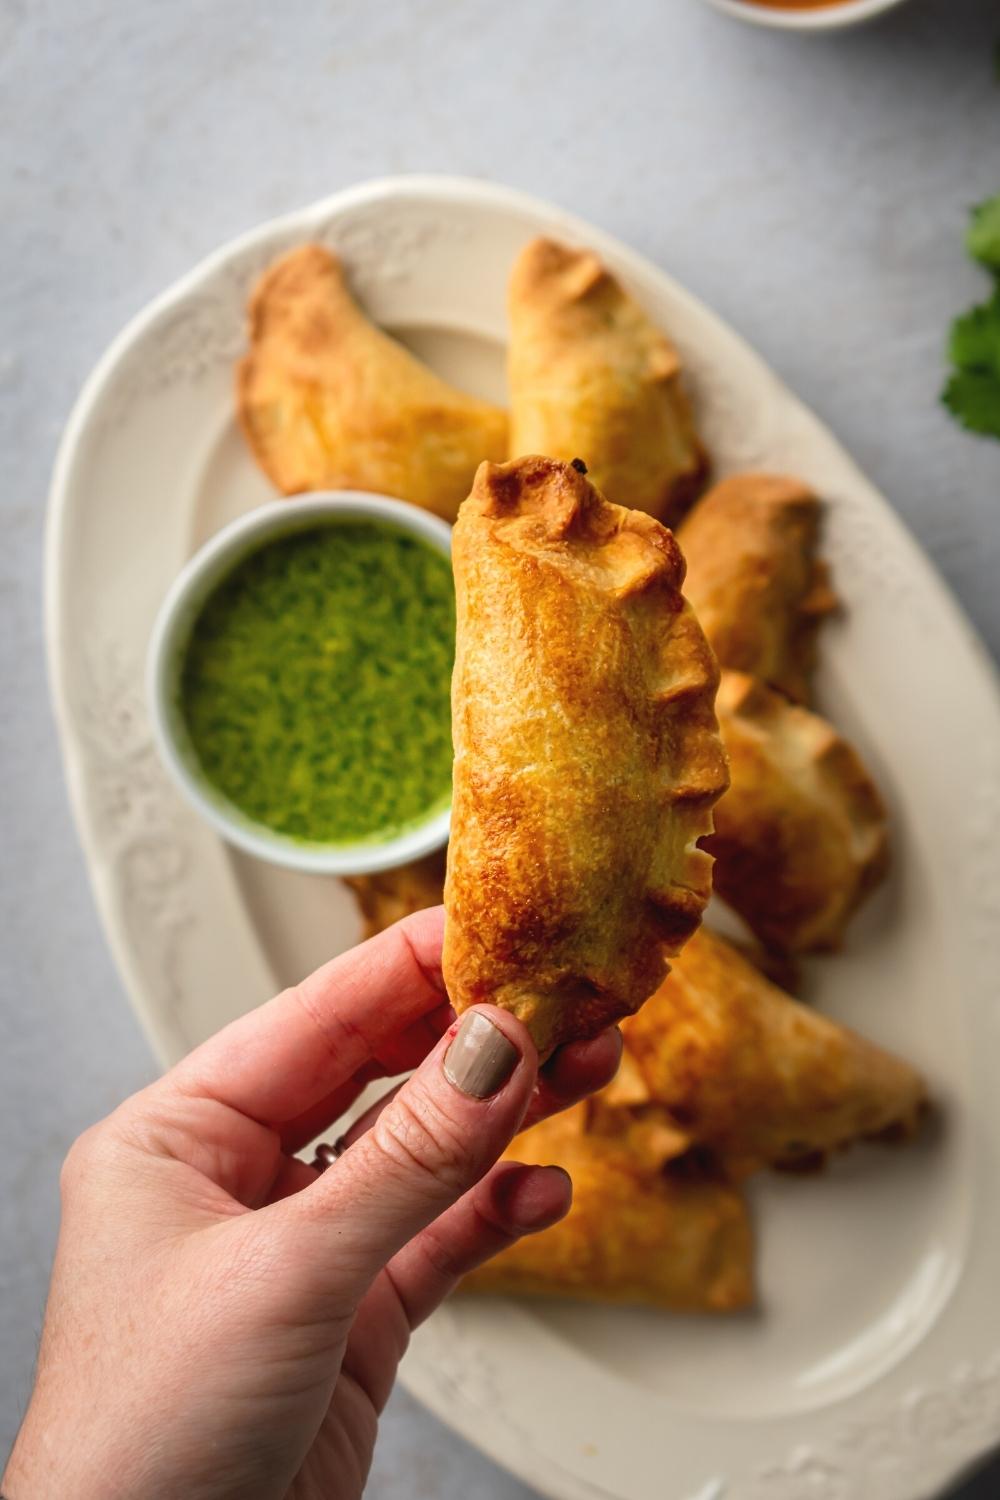 A hand holding a beef empanada over an oval shaped white plate filled with beef empanadas and a small white cup of salsa Verde.